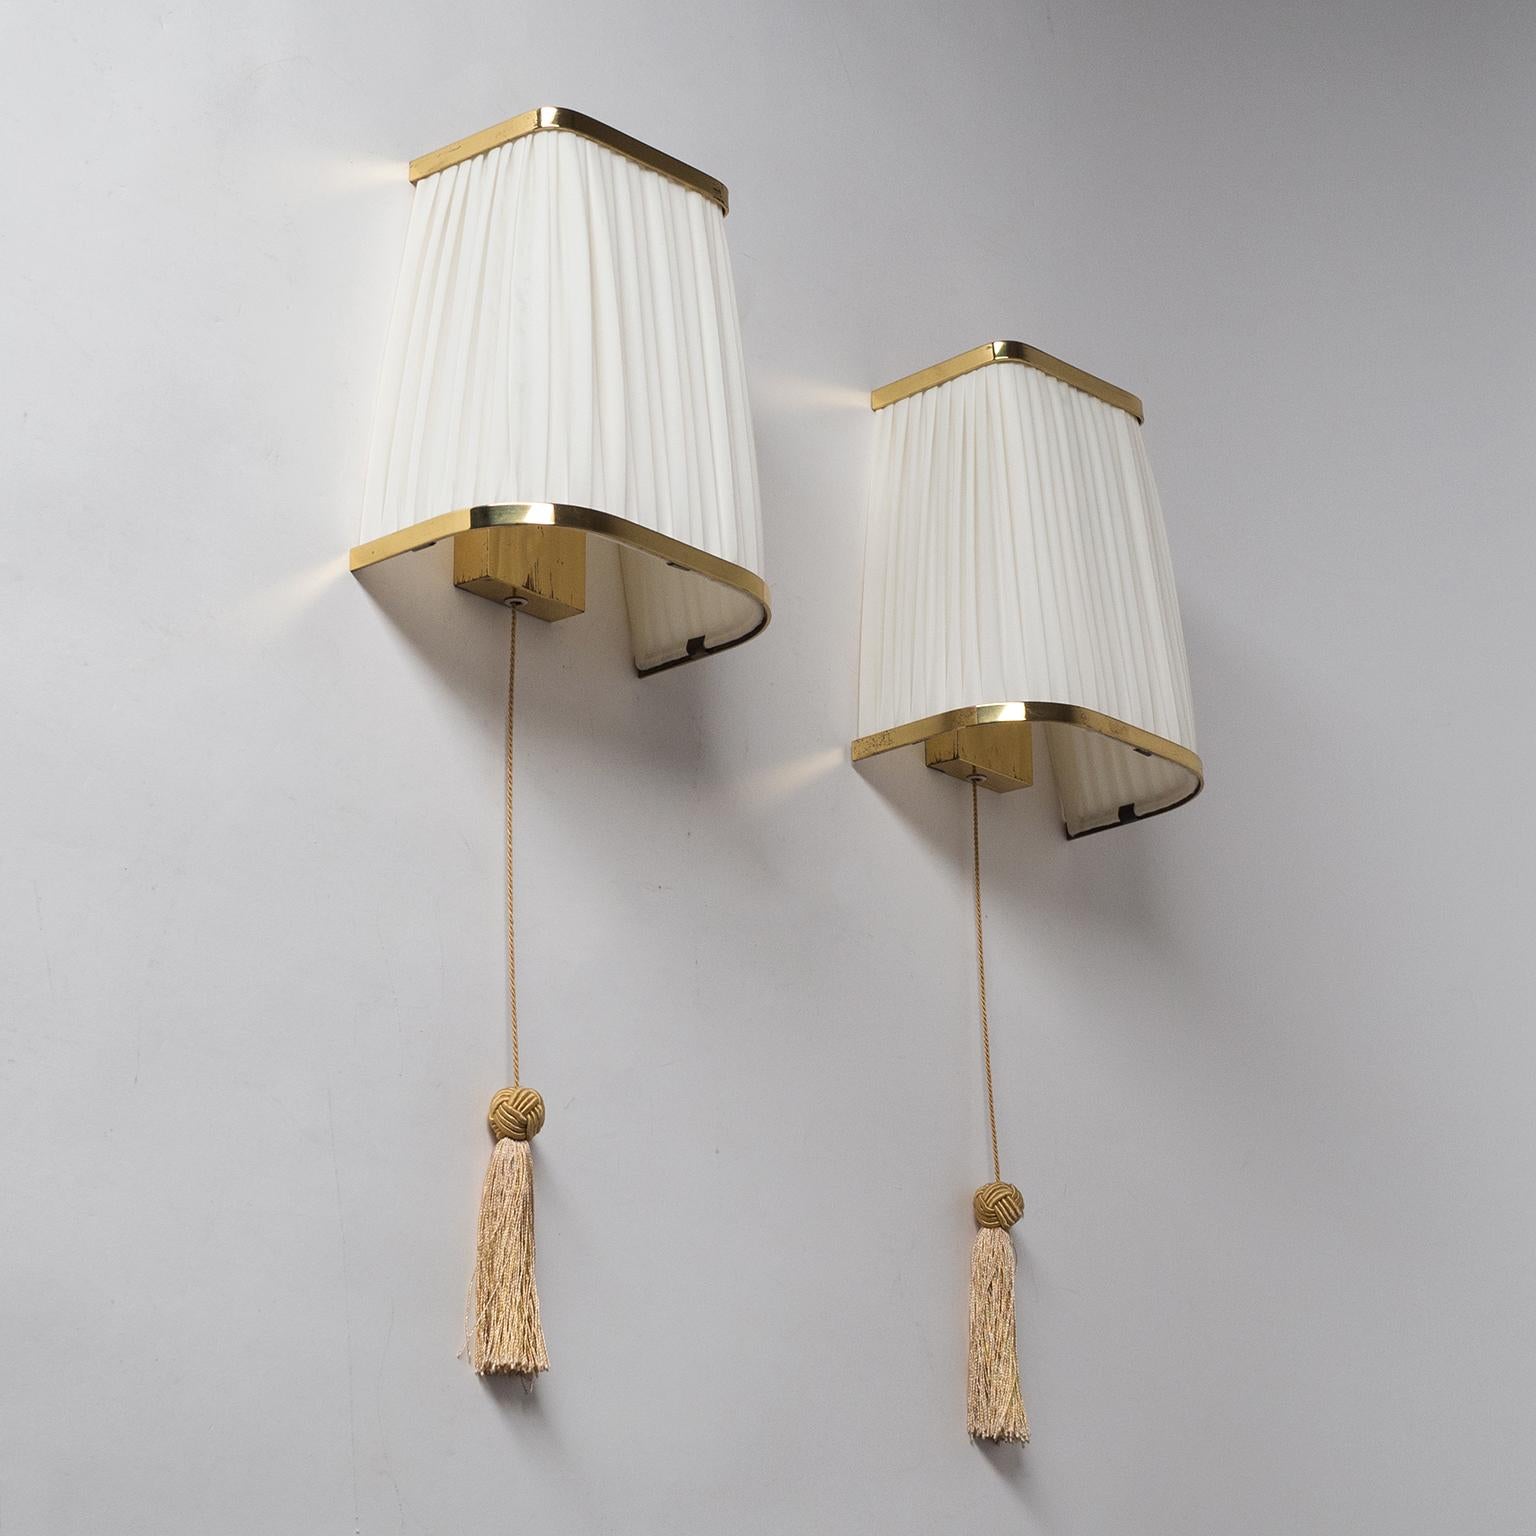 Fine pair of brass wall lights with large pleated shades from the 1940s-1950s. One original brass E27 socket with new fabric on the original shades. Height with tassel is 20inches/51cm.